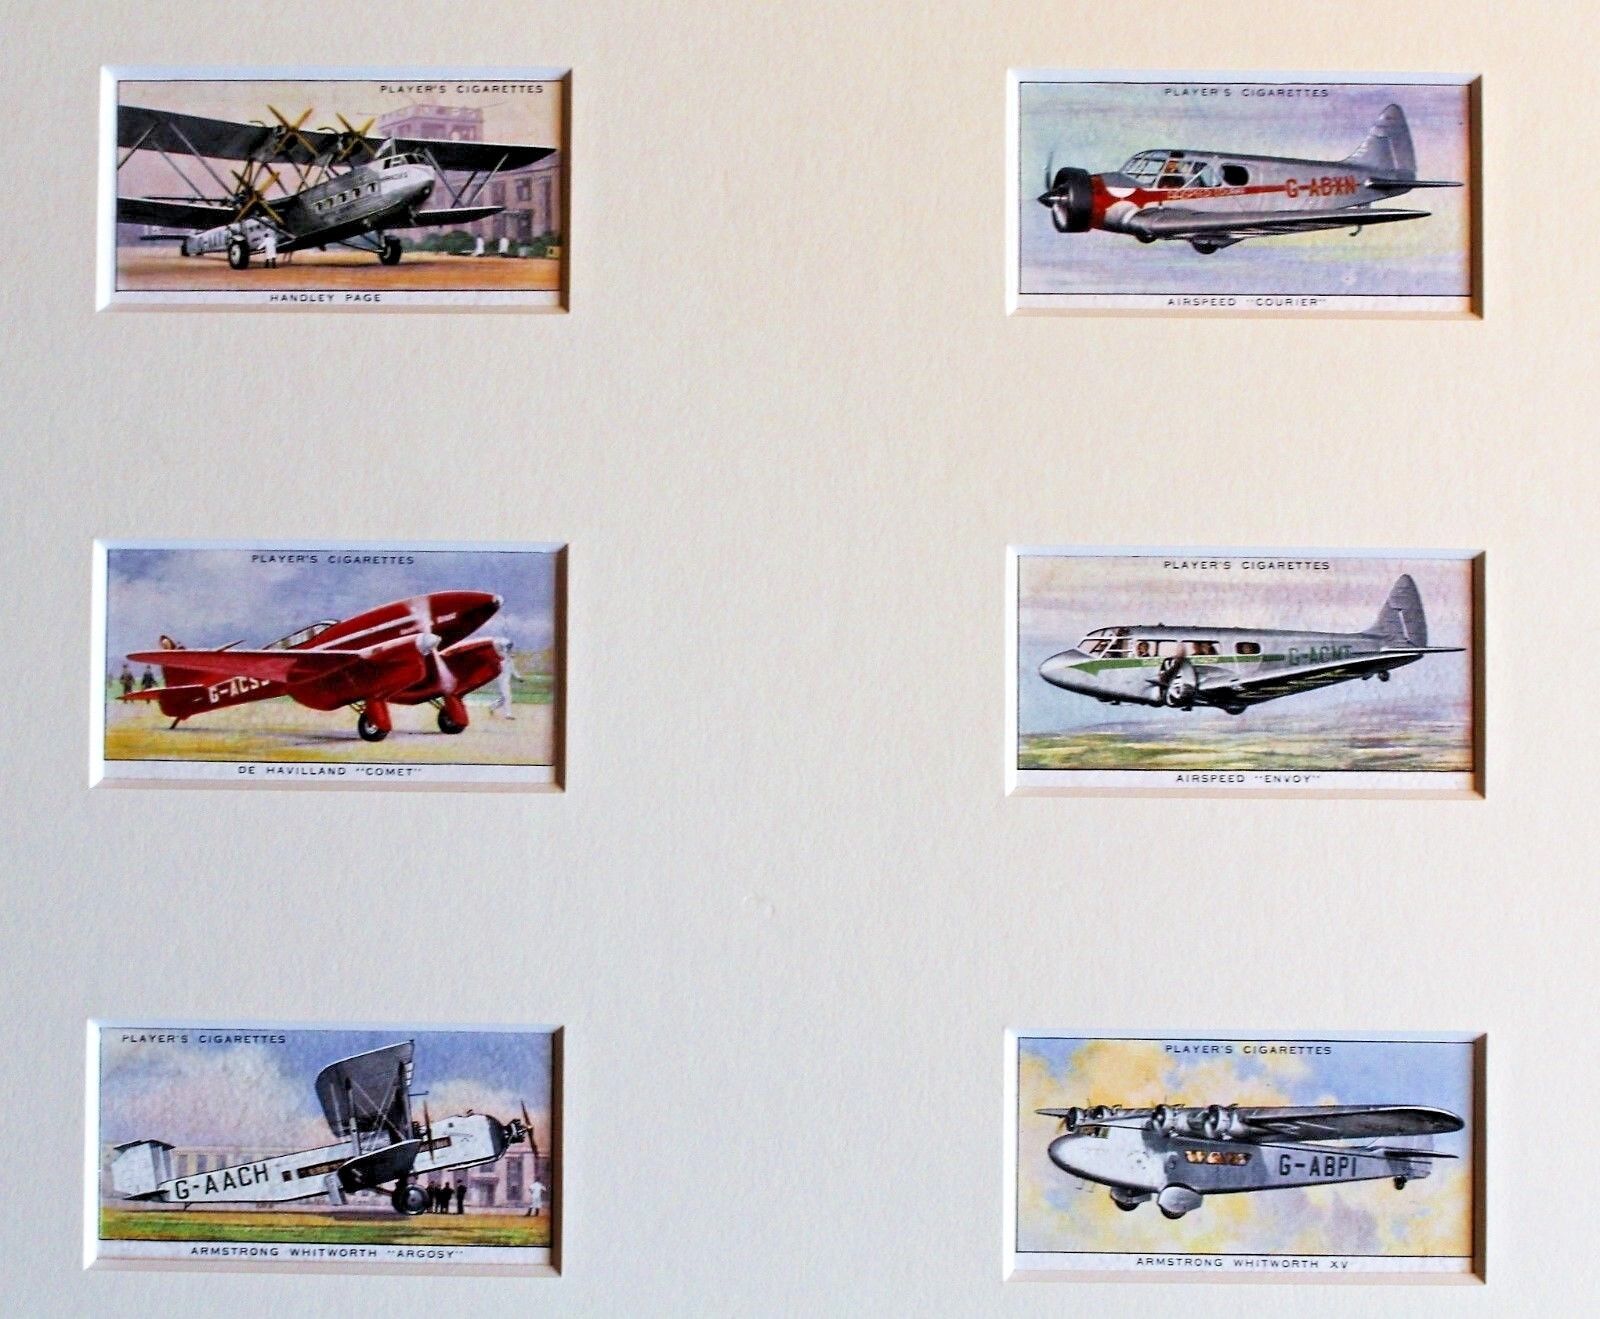 Beautifully Matted Set of 6 English Player\'s Cigarette Airplane Cards c. 1935